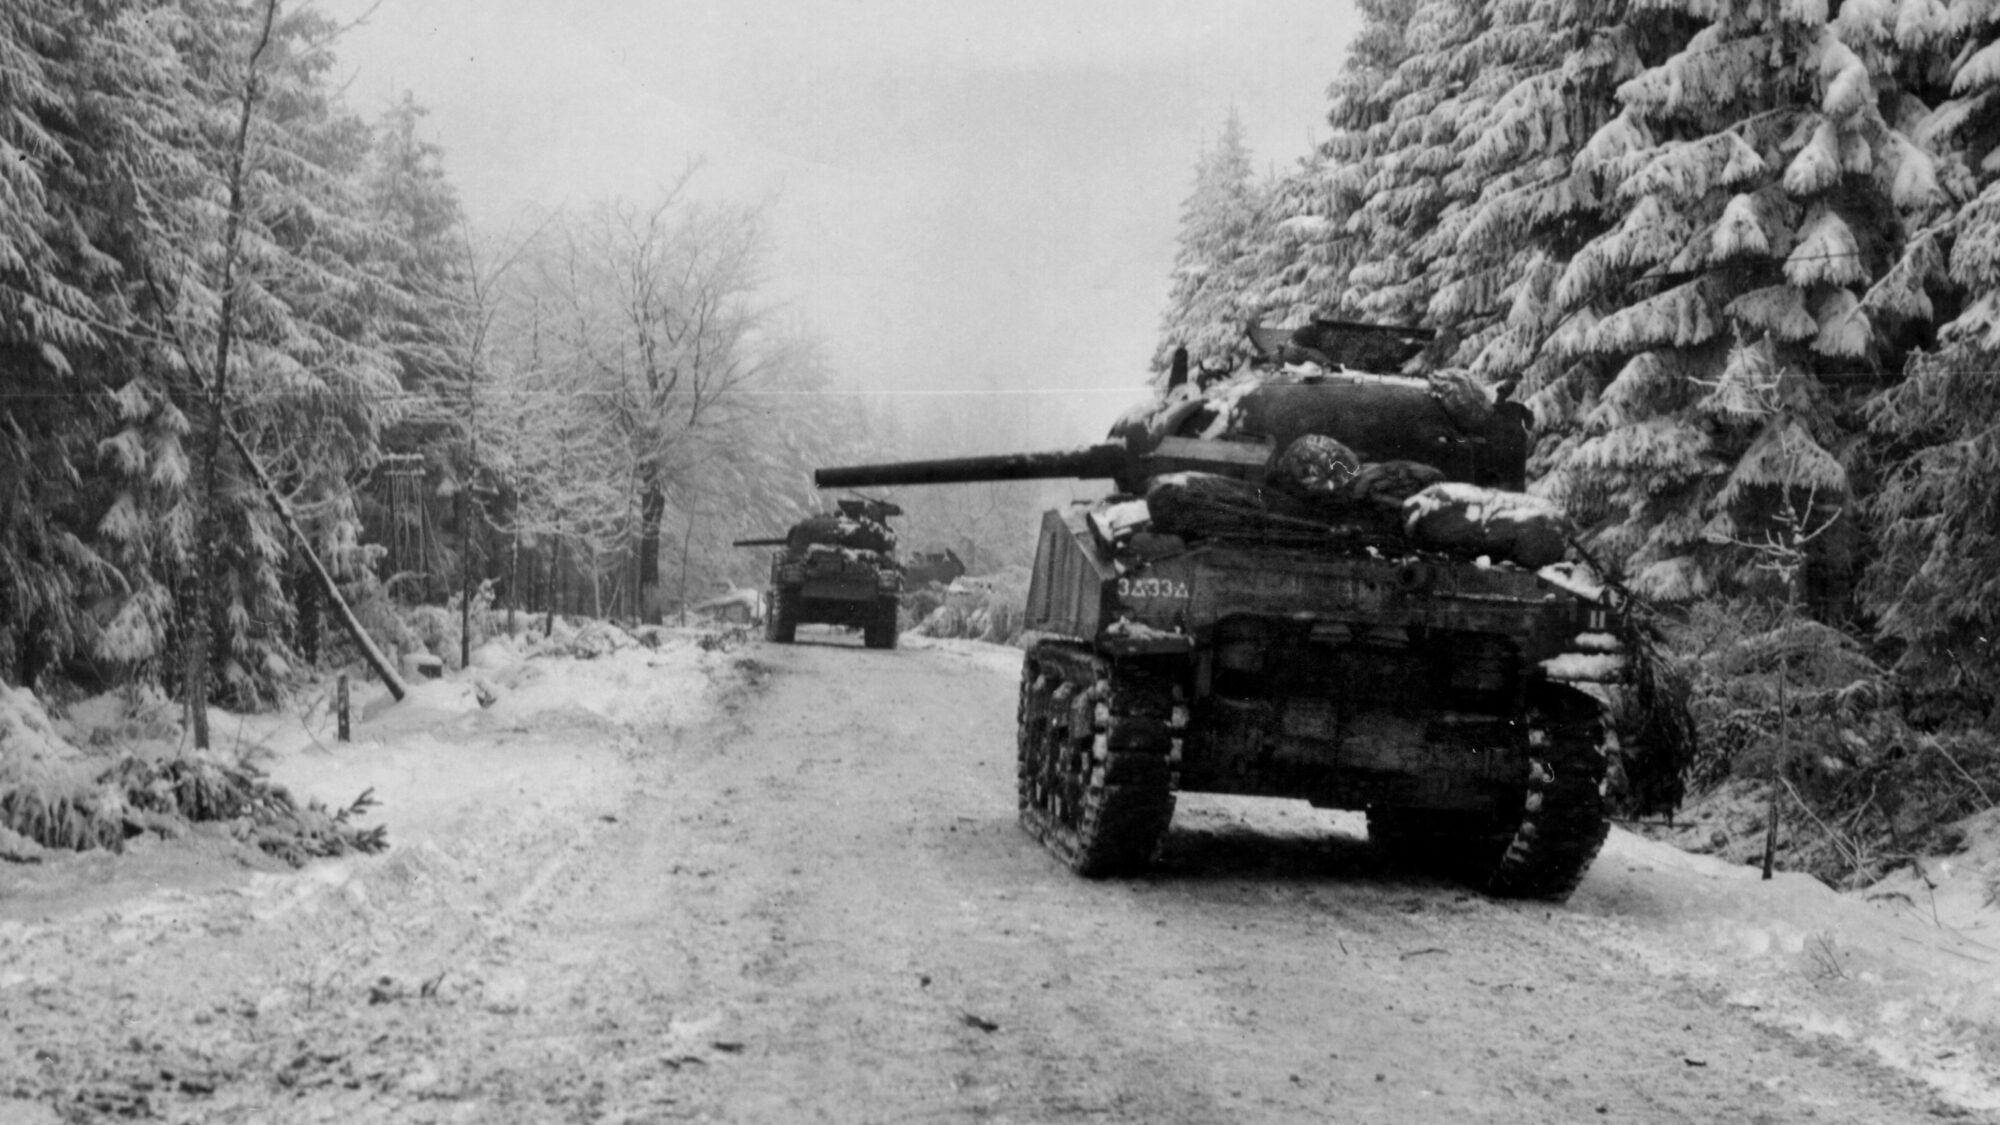 Armored Soldiers at the Battle of the Bulge - Warfare History Network